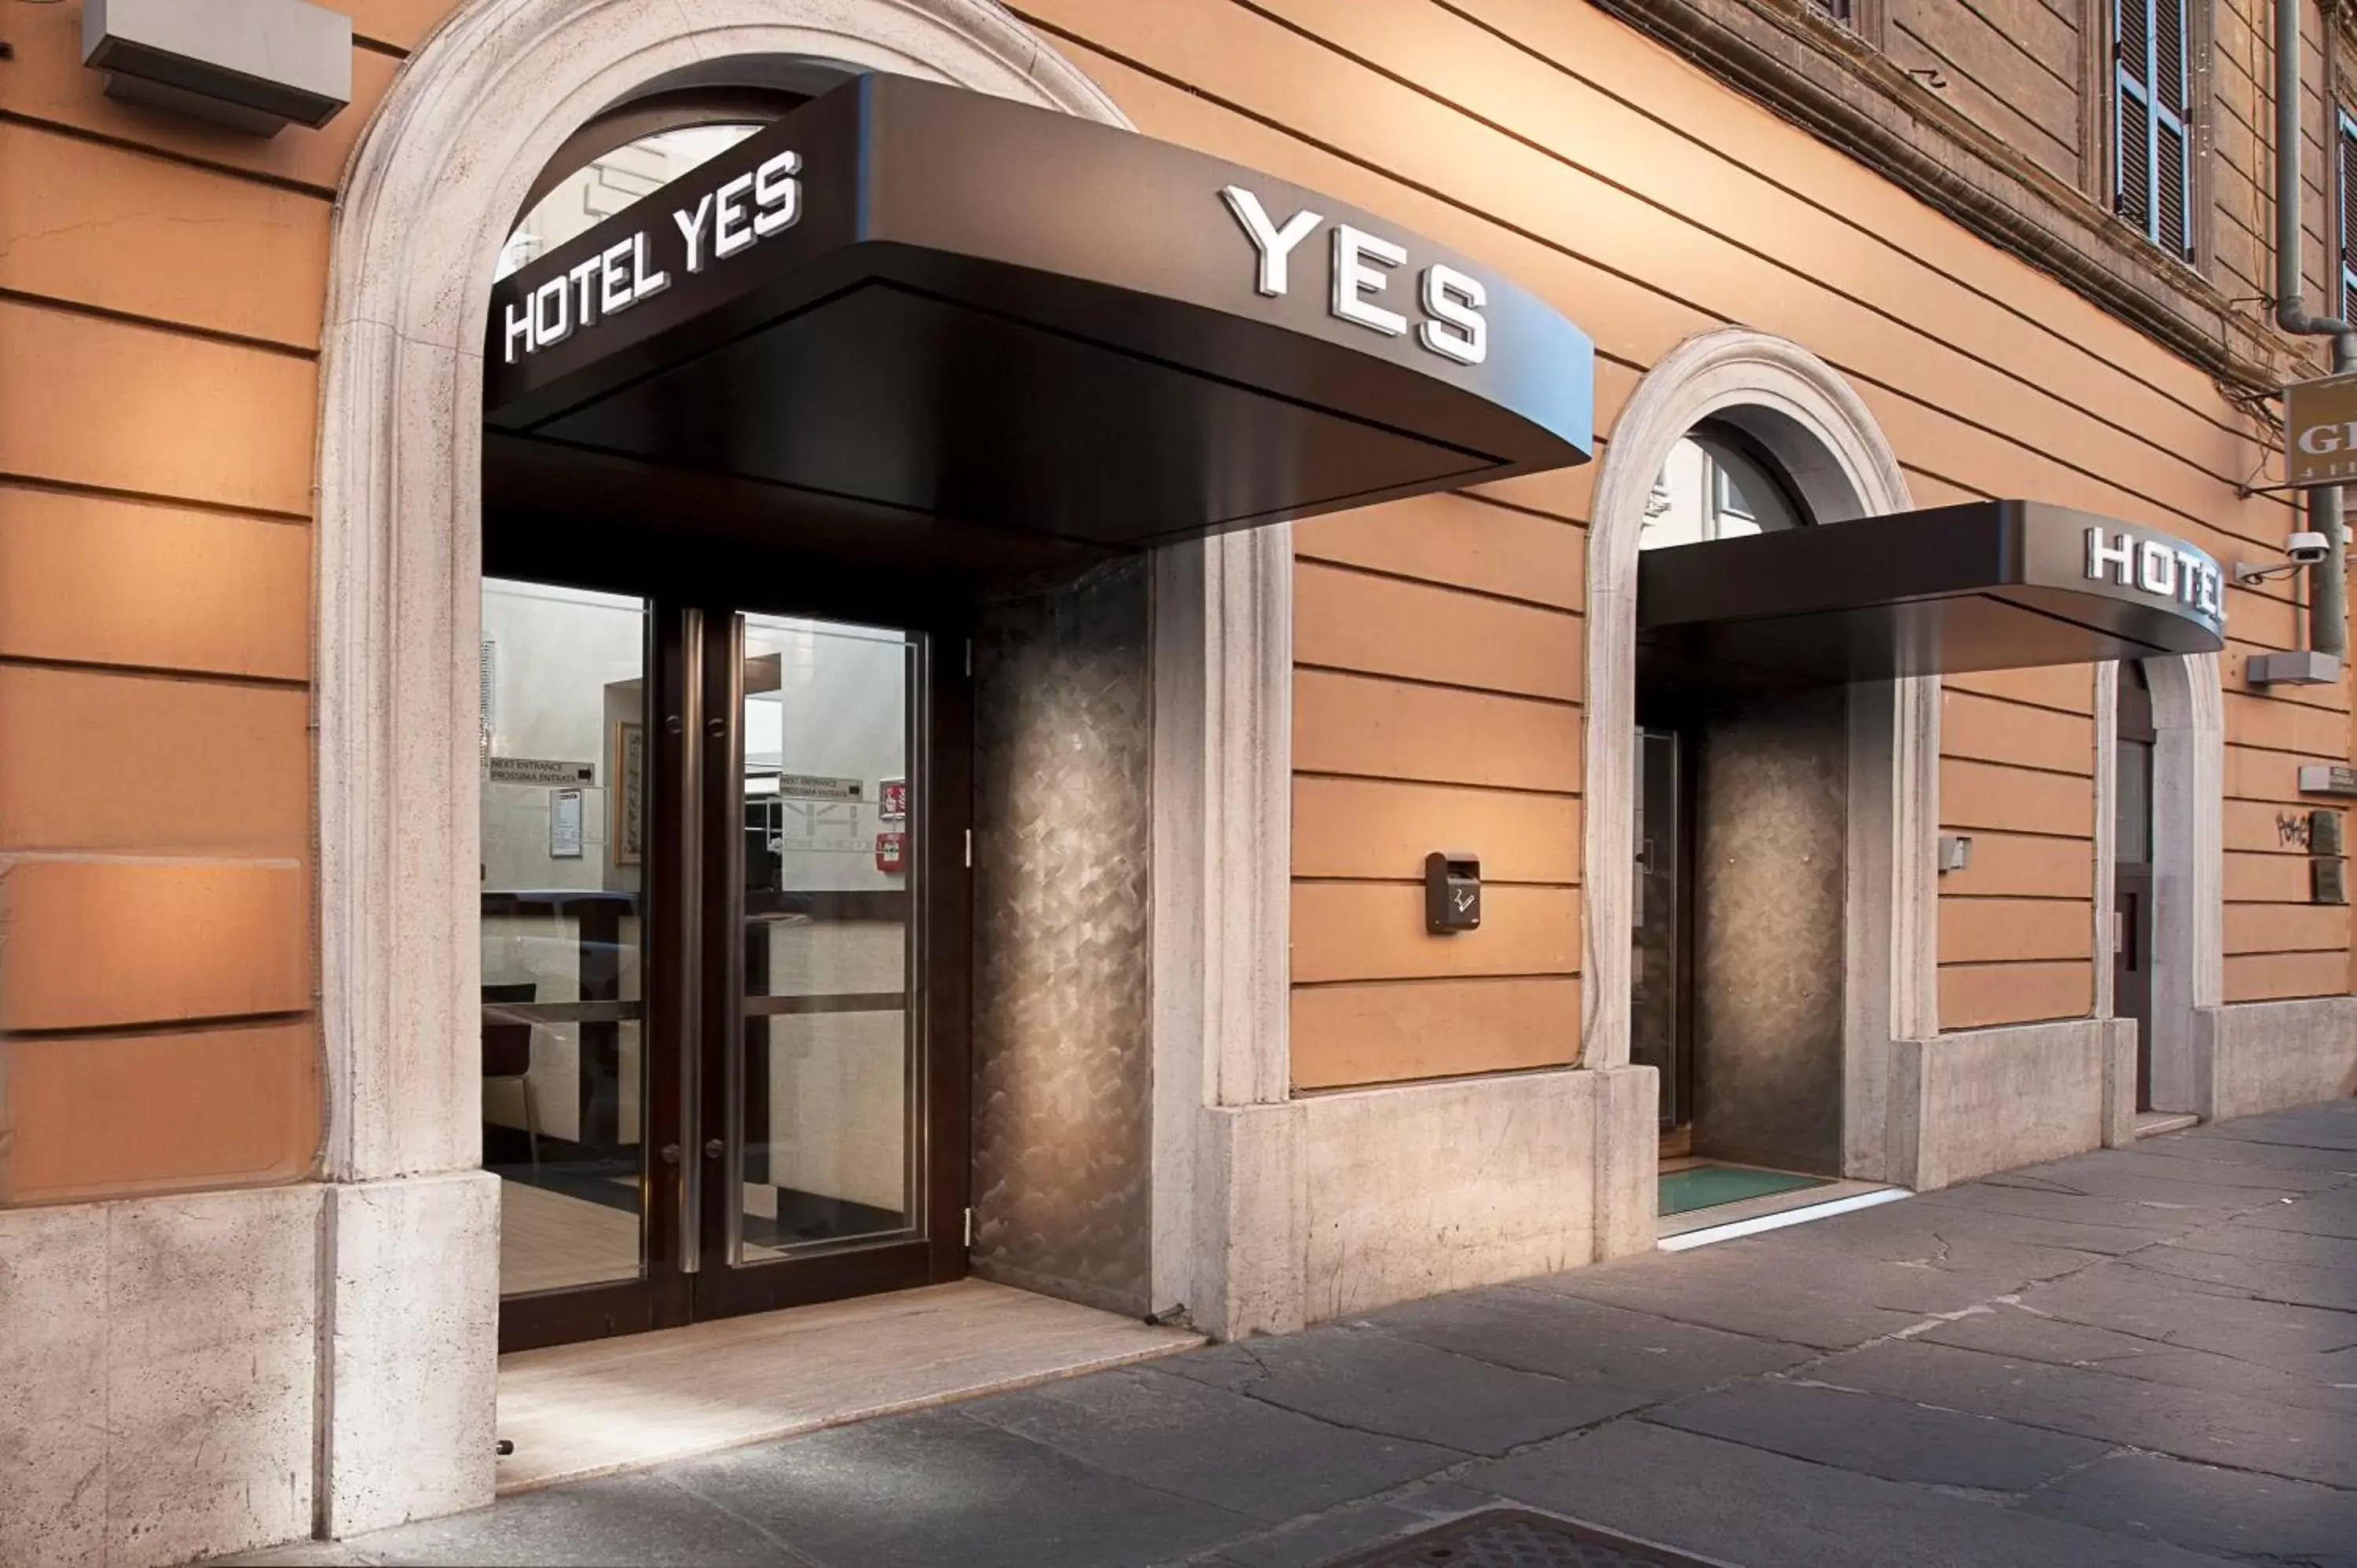 Property building in Yes Hotel